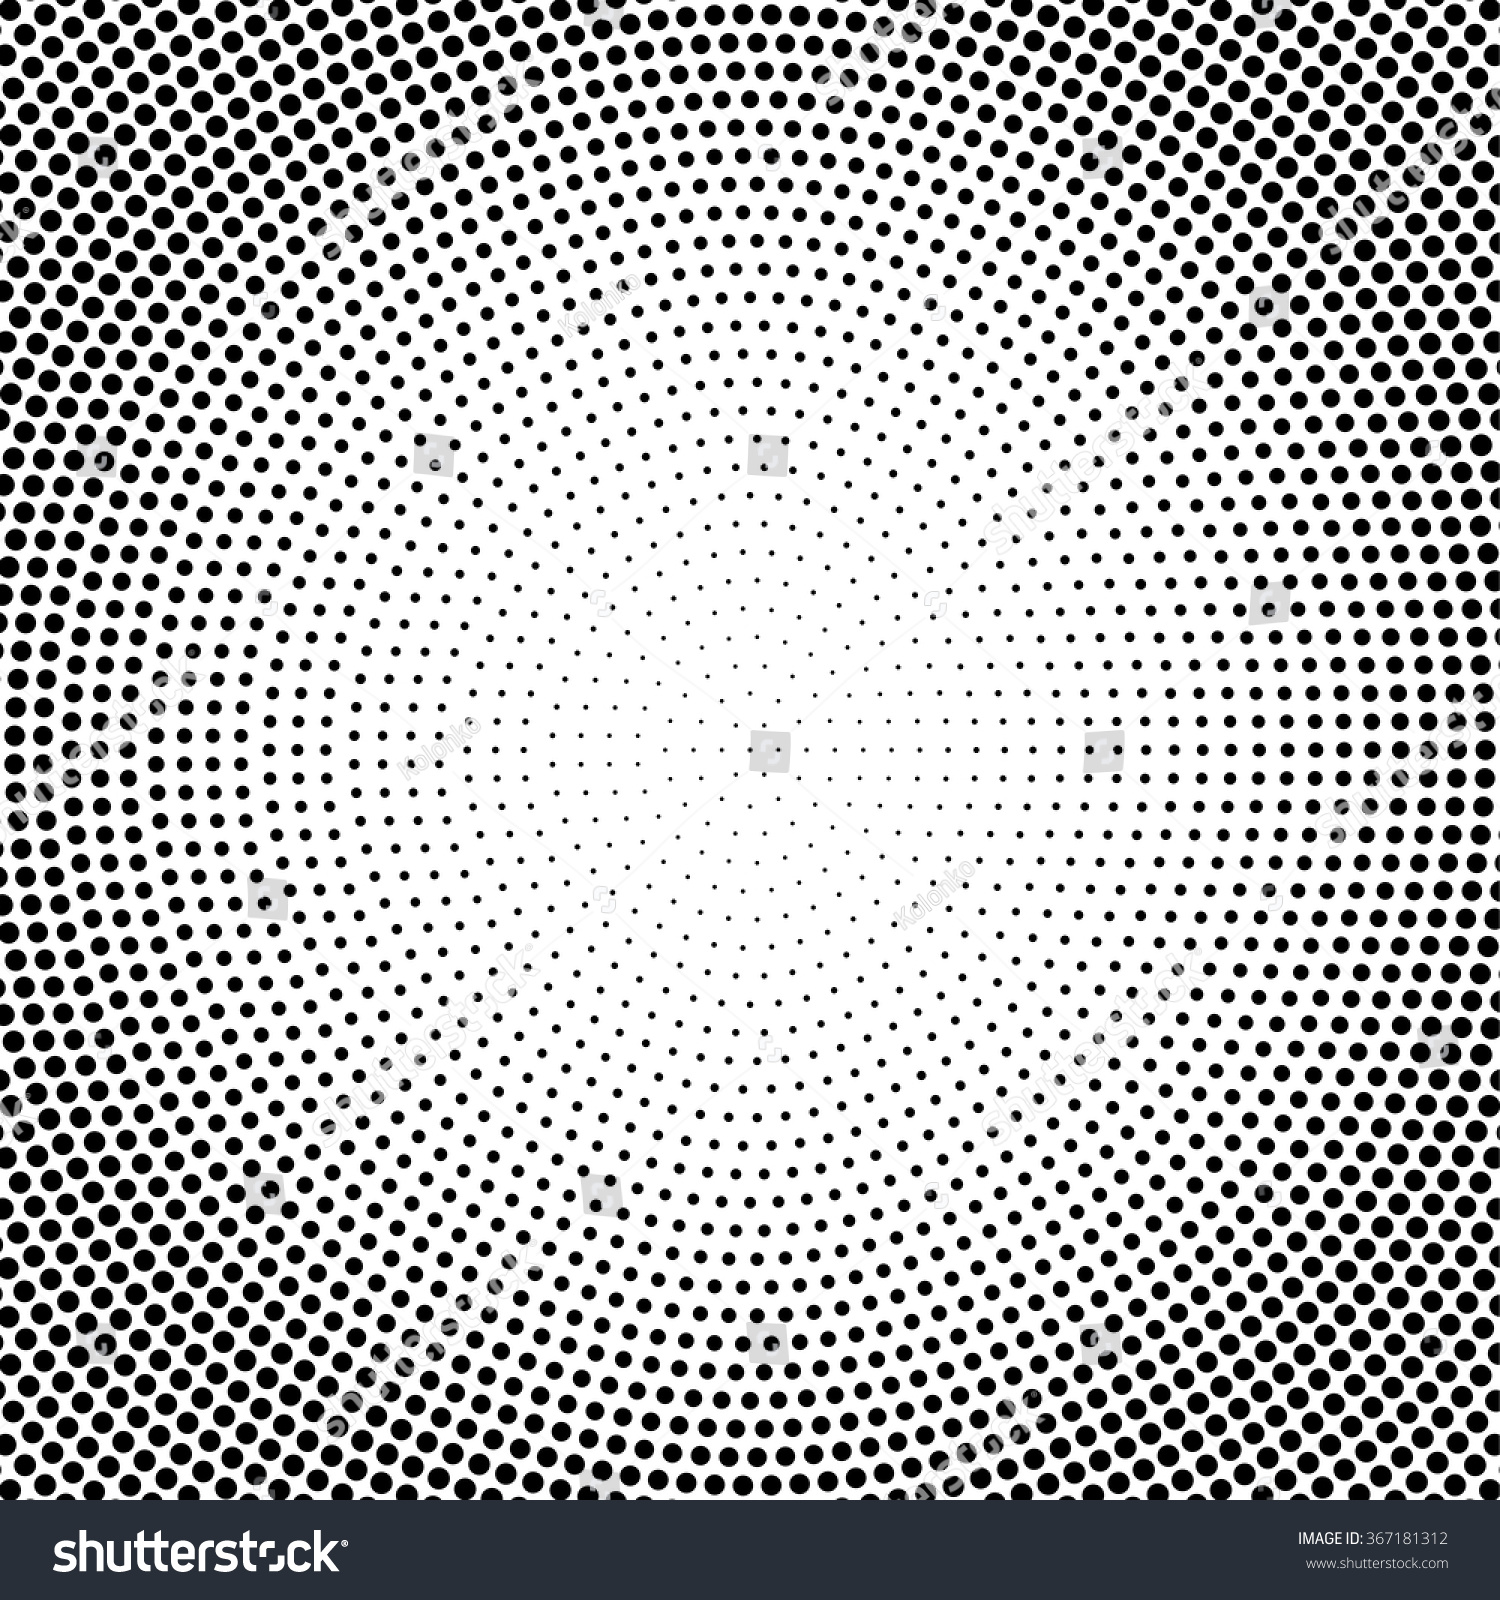 Abstract Vector Black White Dotted Halftone Stock Vector Royalty Free